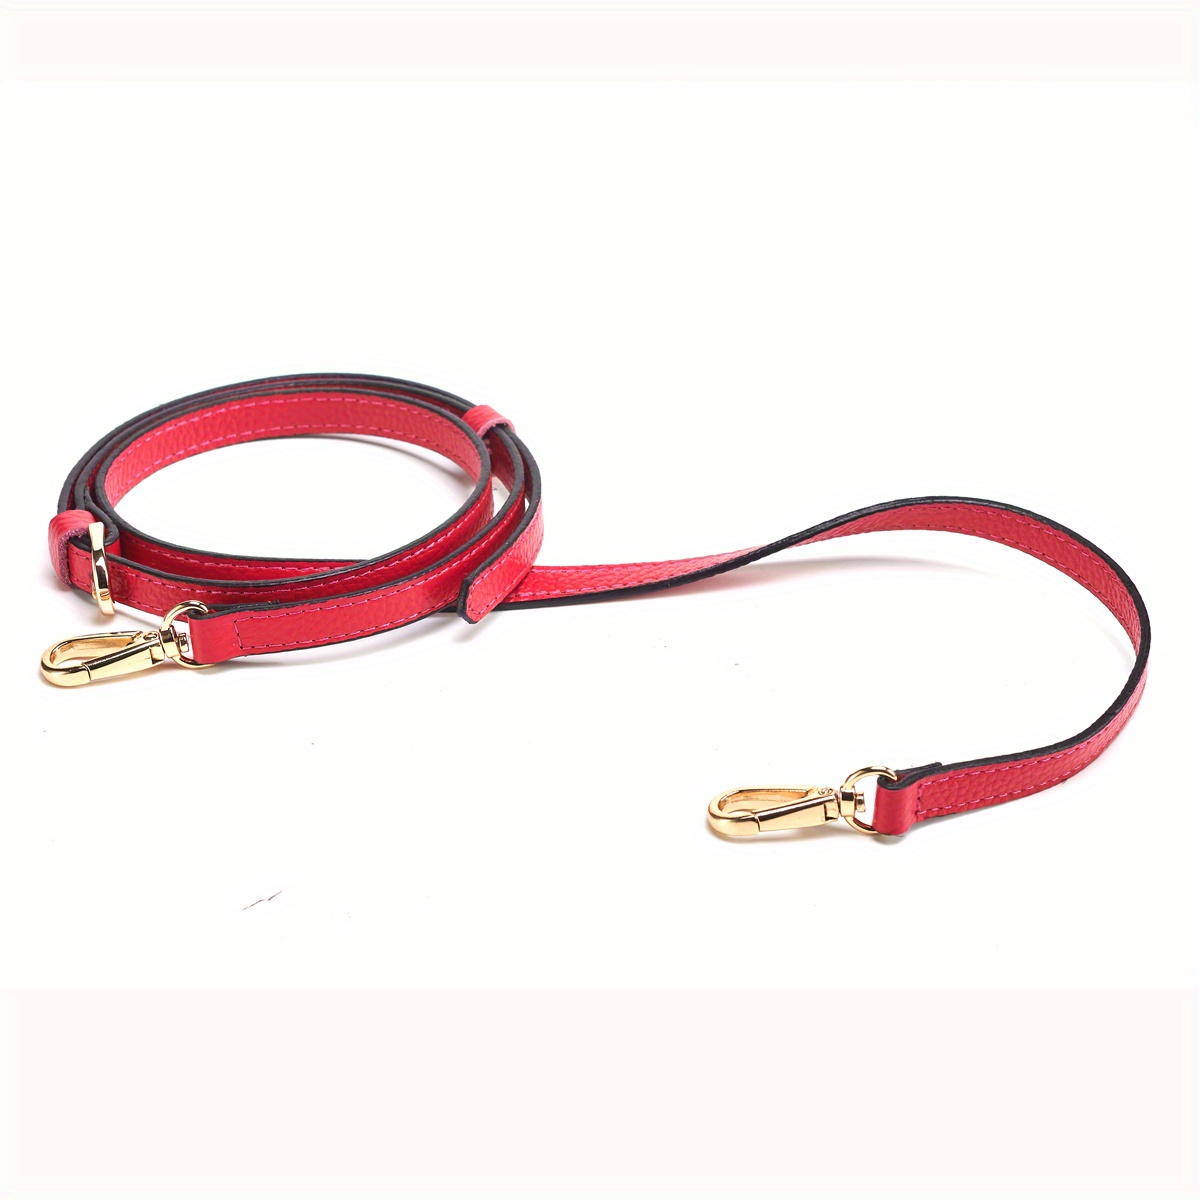 14 Colors Purse Strap Replacement, Leather Adjustable Crossbody